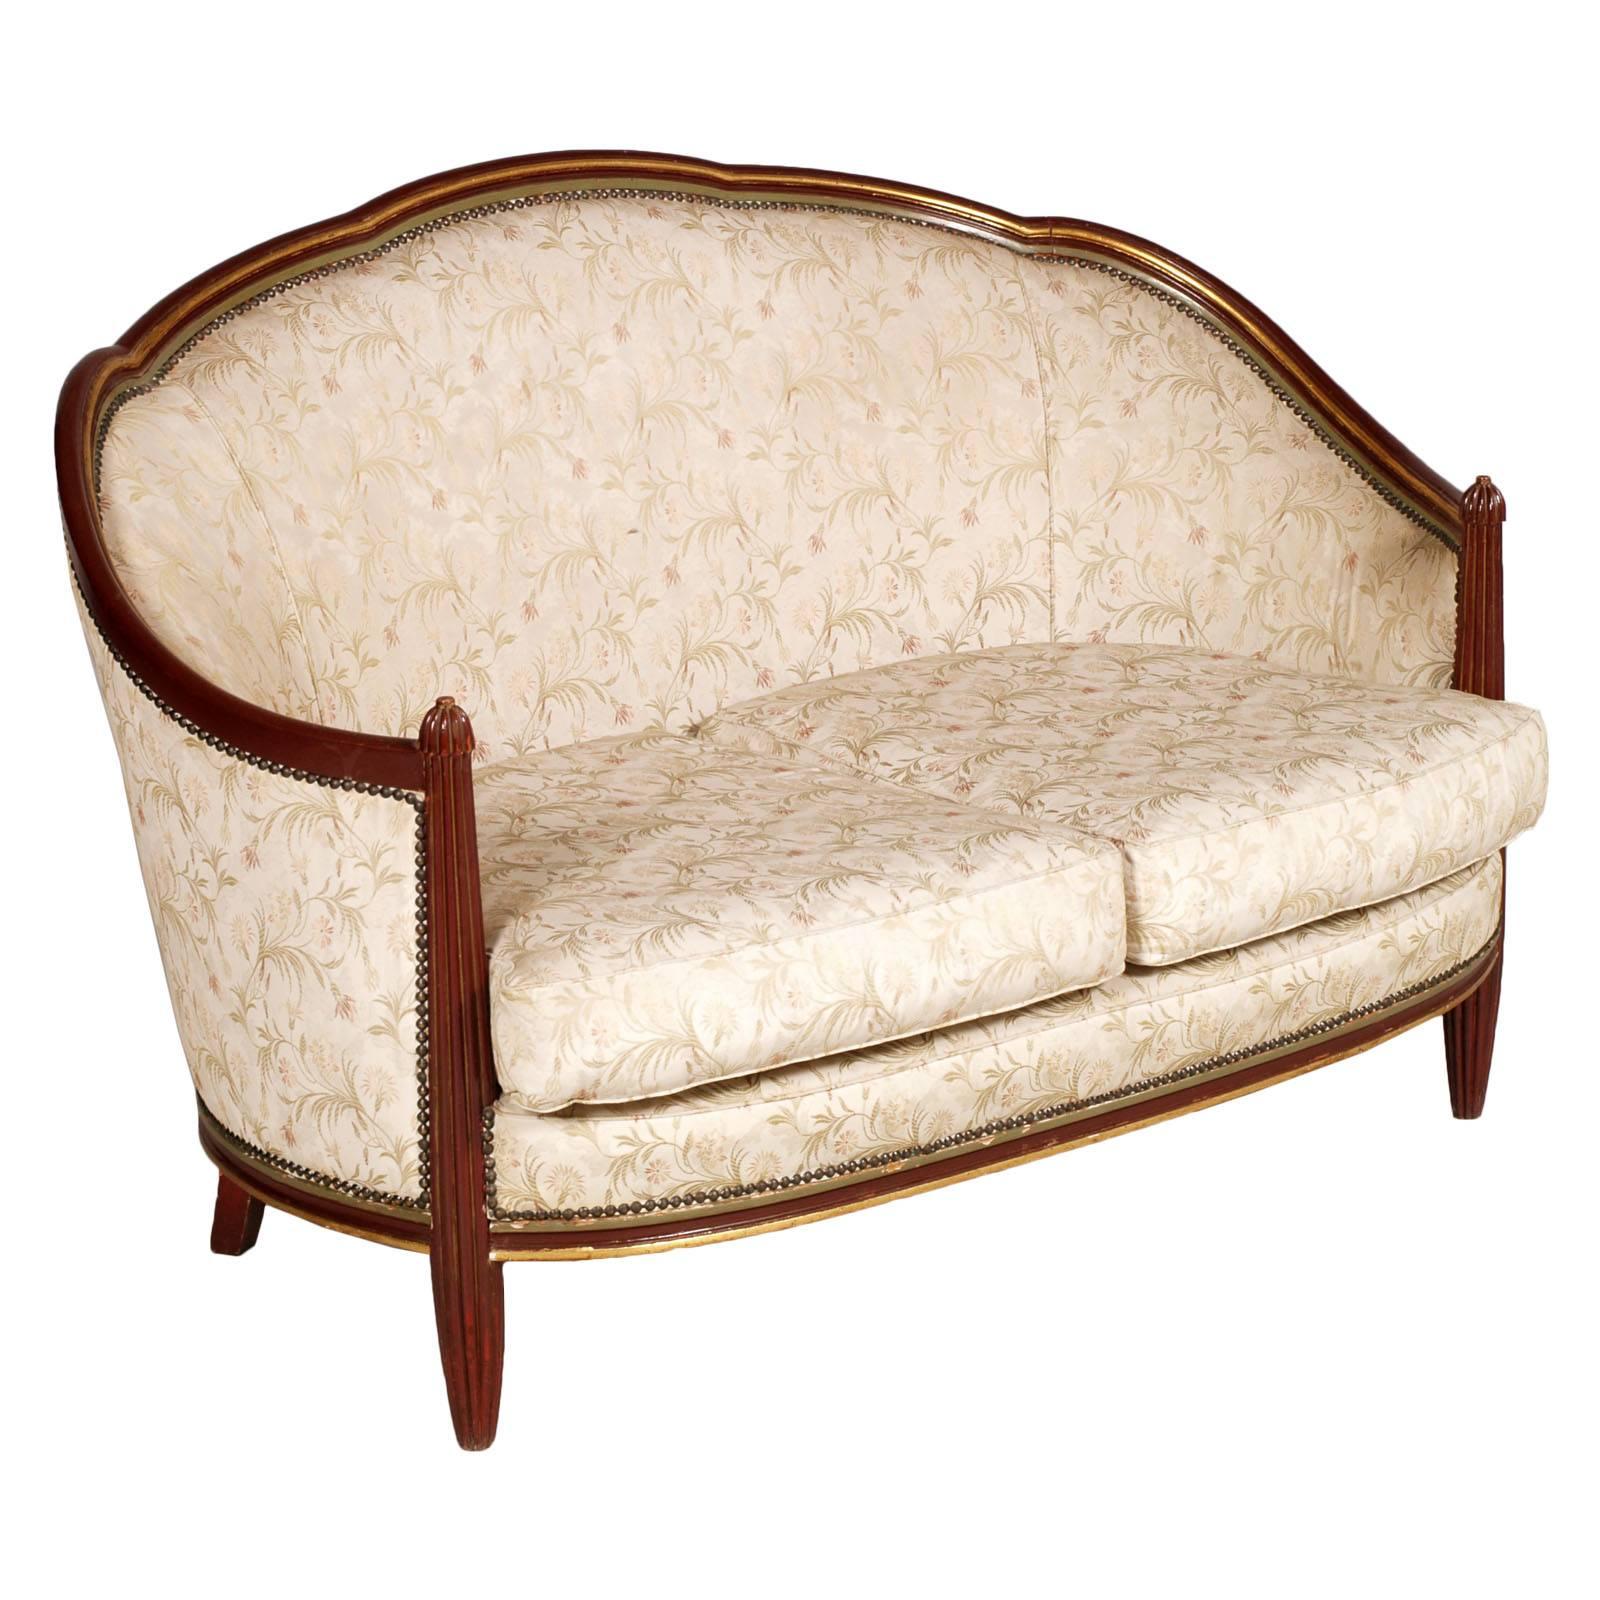 Awesome loveseat sofa Art Nouveau Belle Époque, in carved mahogany lacquered and gilded. We have sanitized the upholstery; ready to use
Upholstery in good condition, still usable
We can do, on your choice, a new upholstery with a price of 700